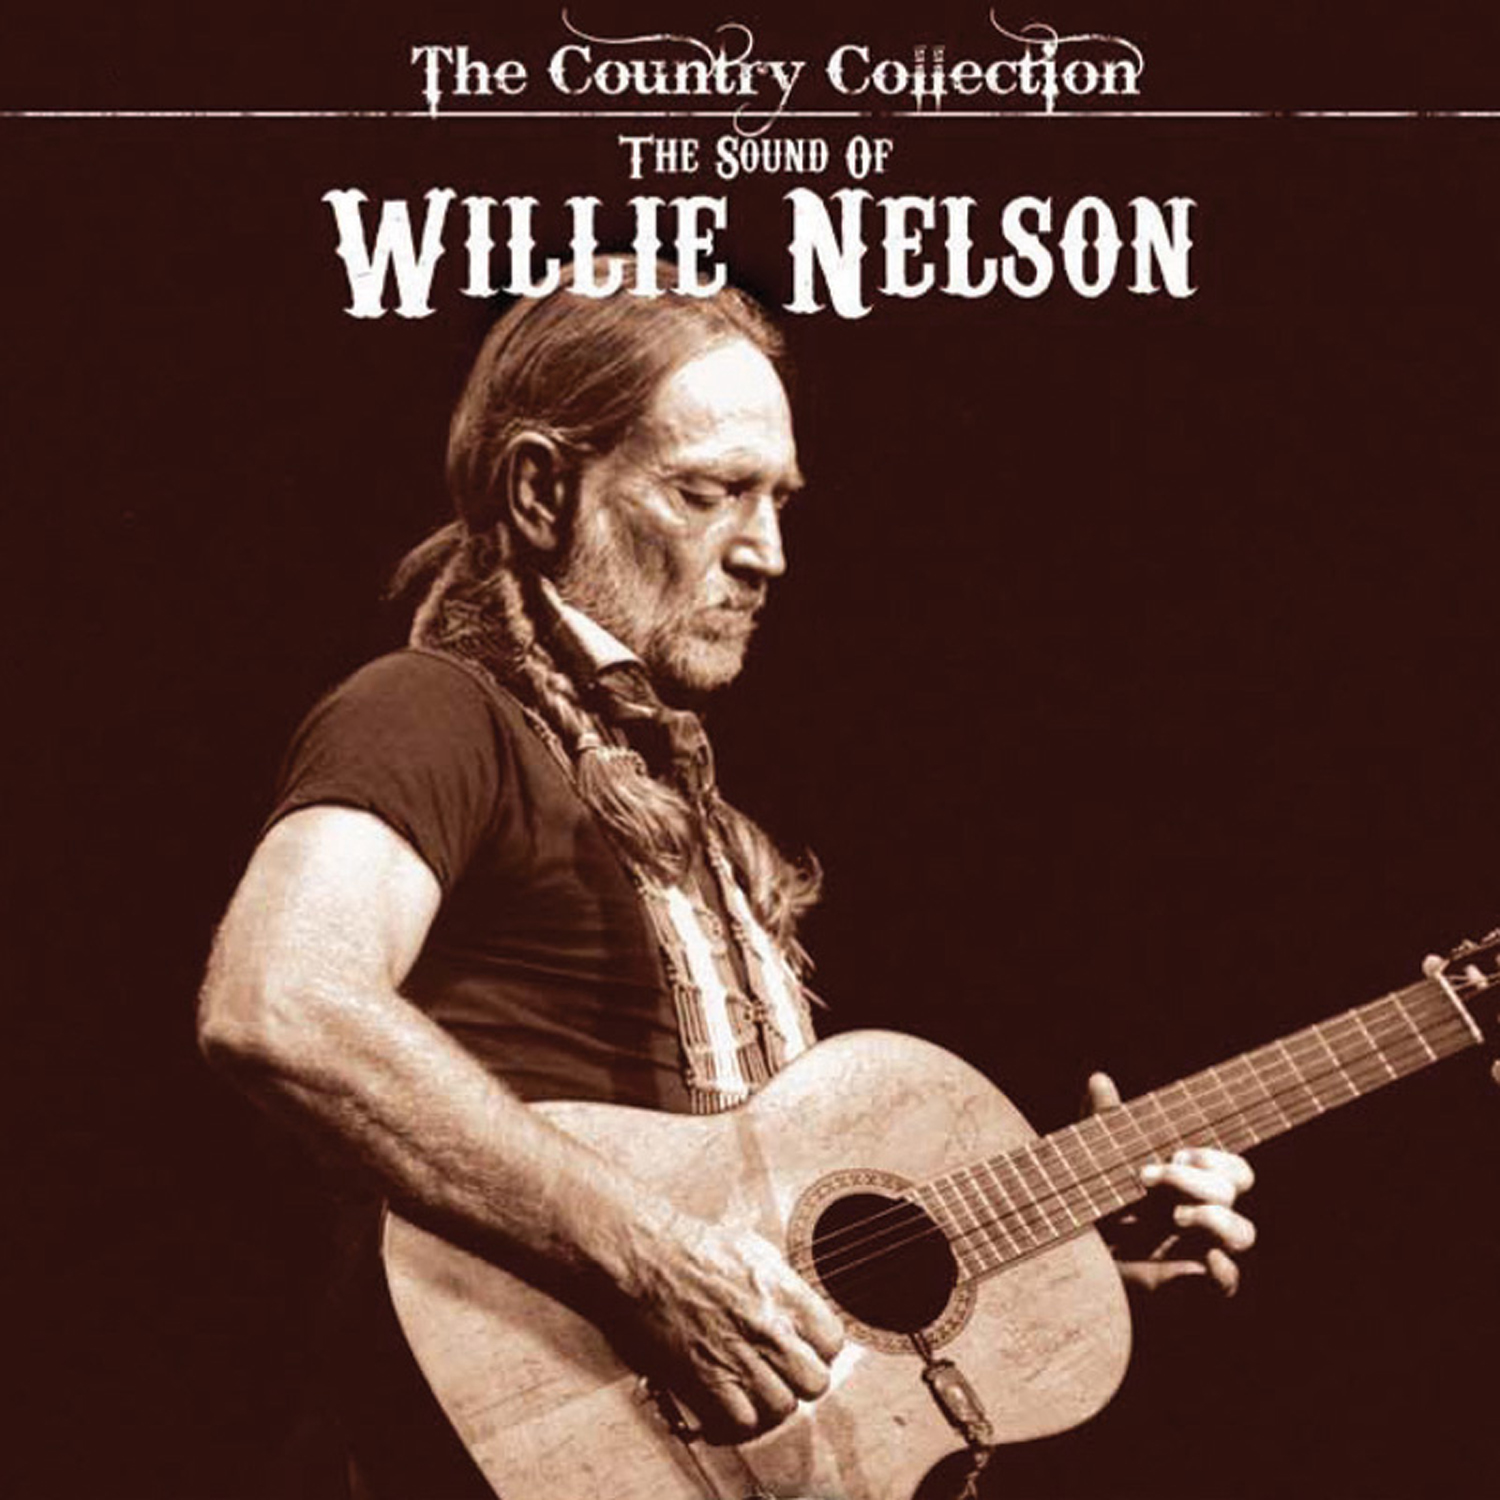 The Country Collection - The Sound Of Willie Nelson